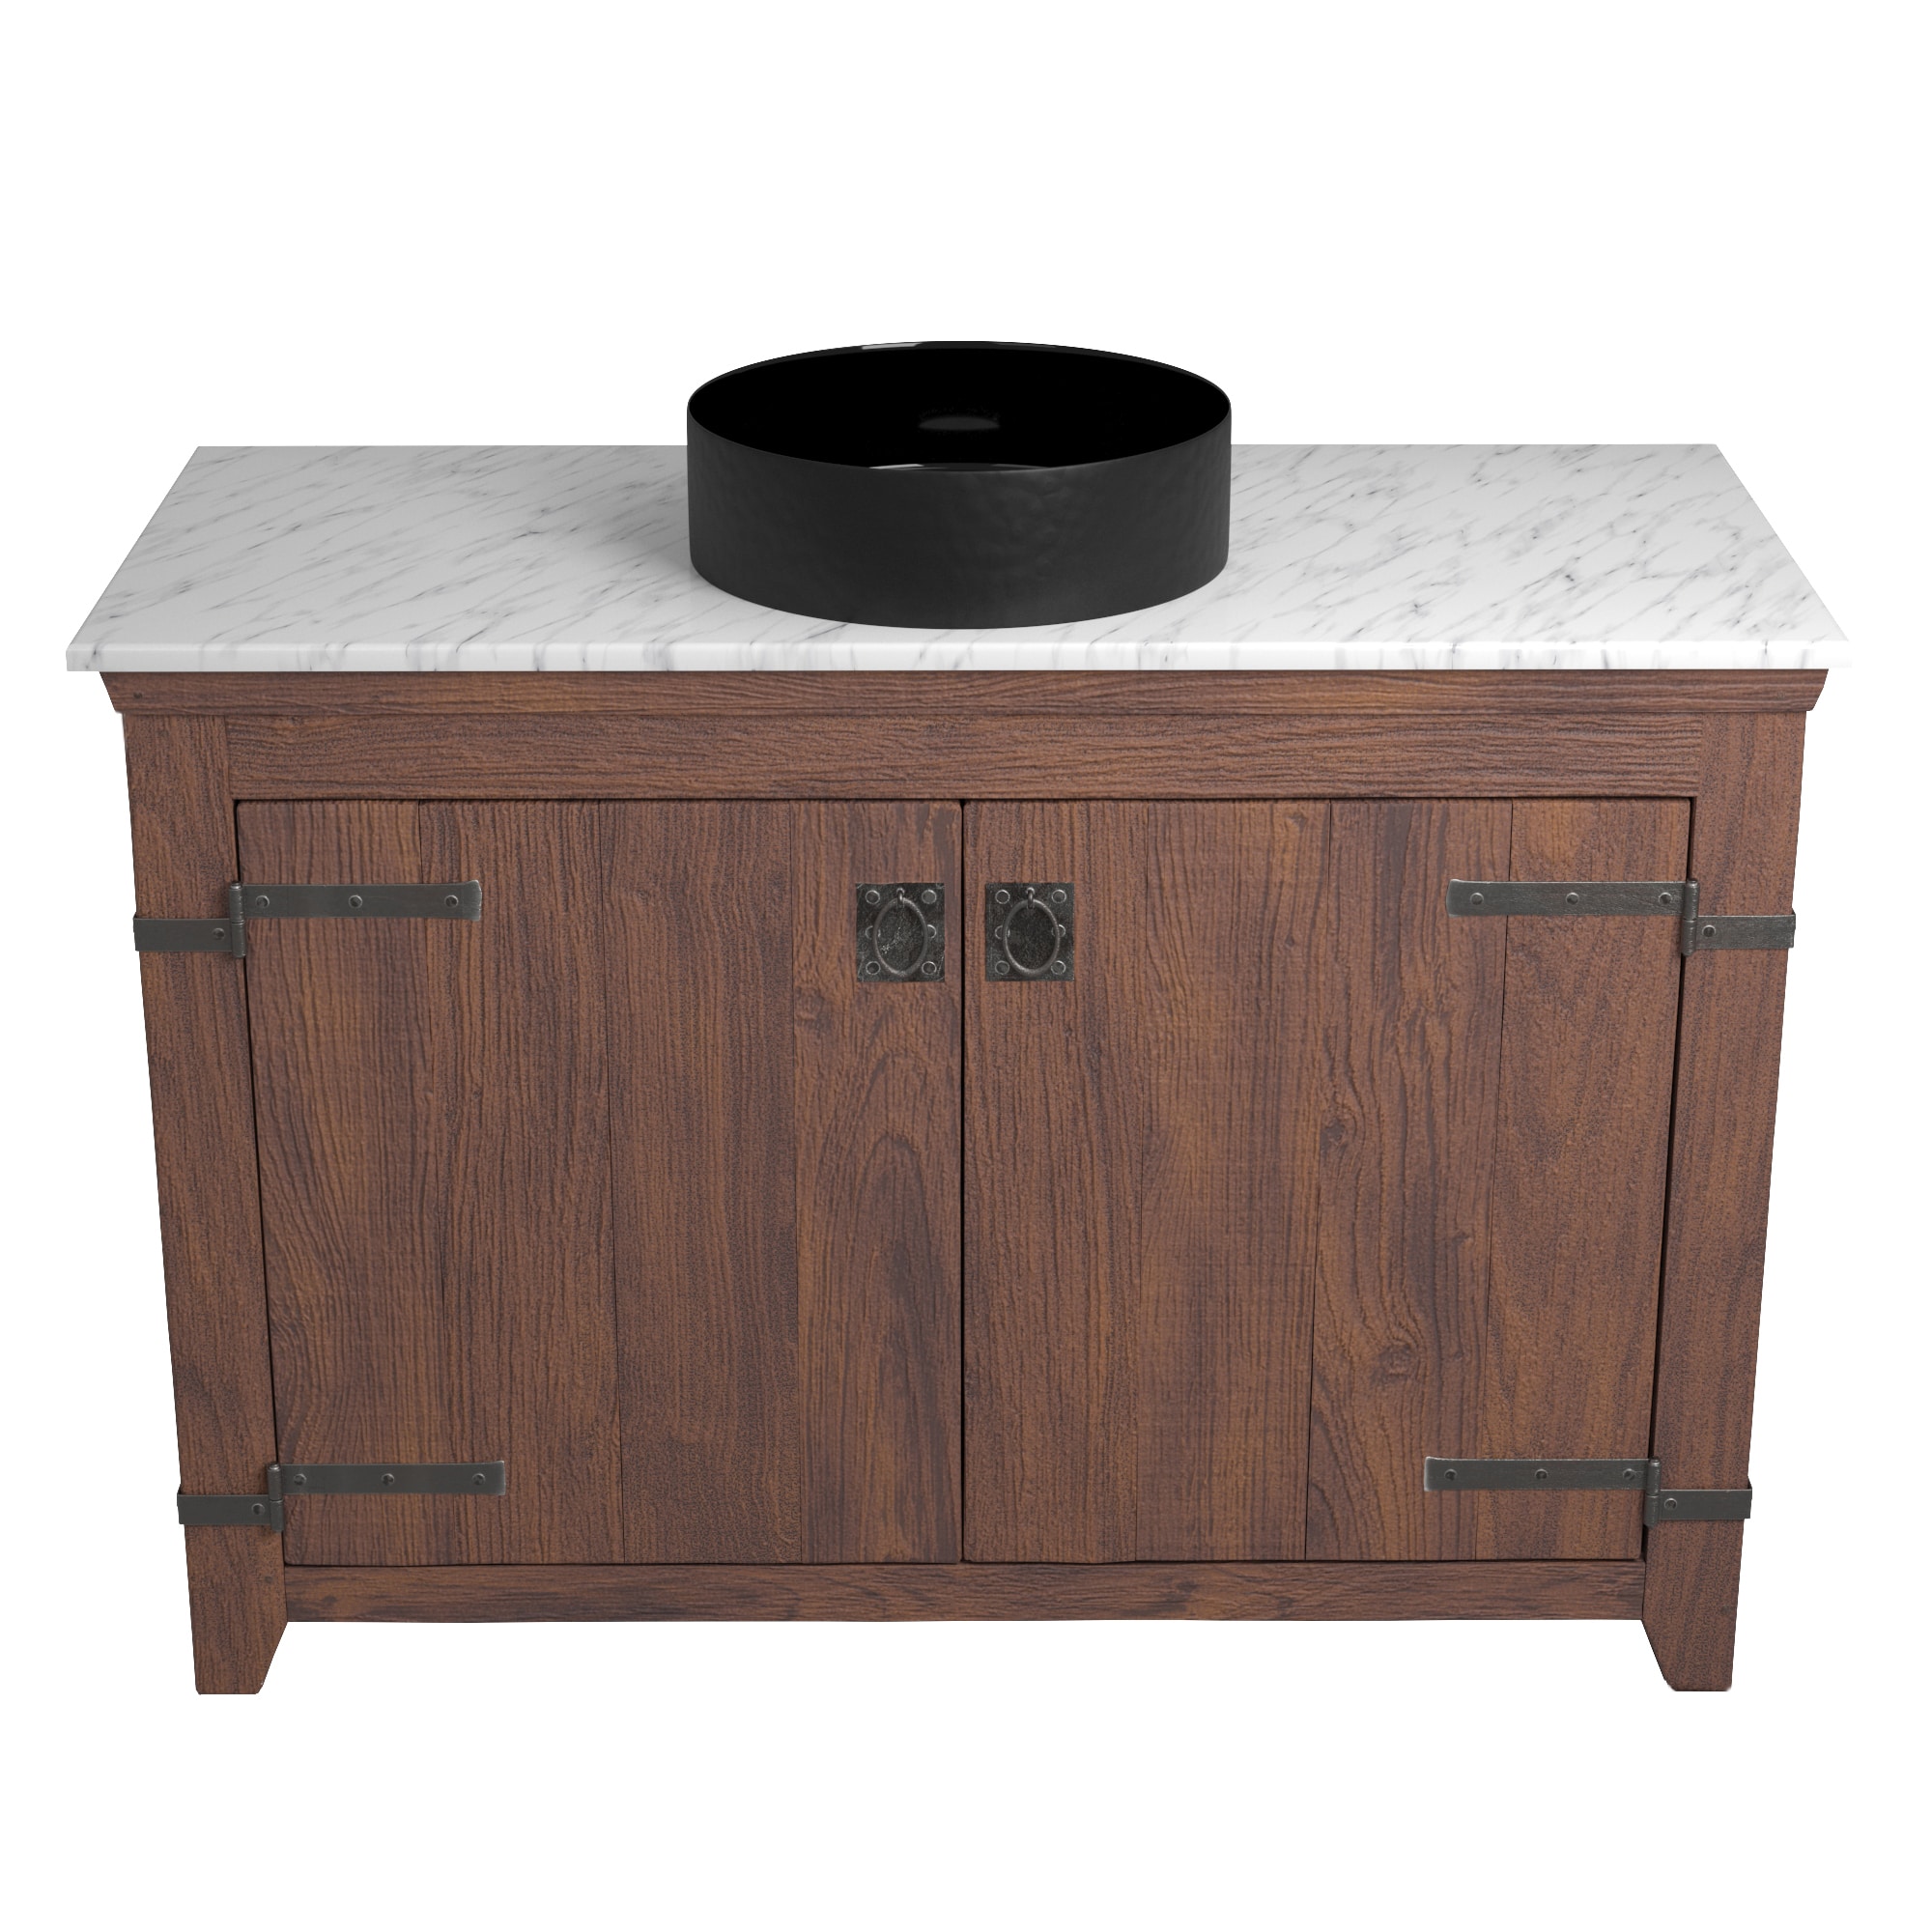 Native Trails 48" Americana Vanity in Chestnut with Carrara Marble Top and Positano in Abyss, No Faucet Hole, BND48-VB-CT-MG-044